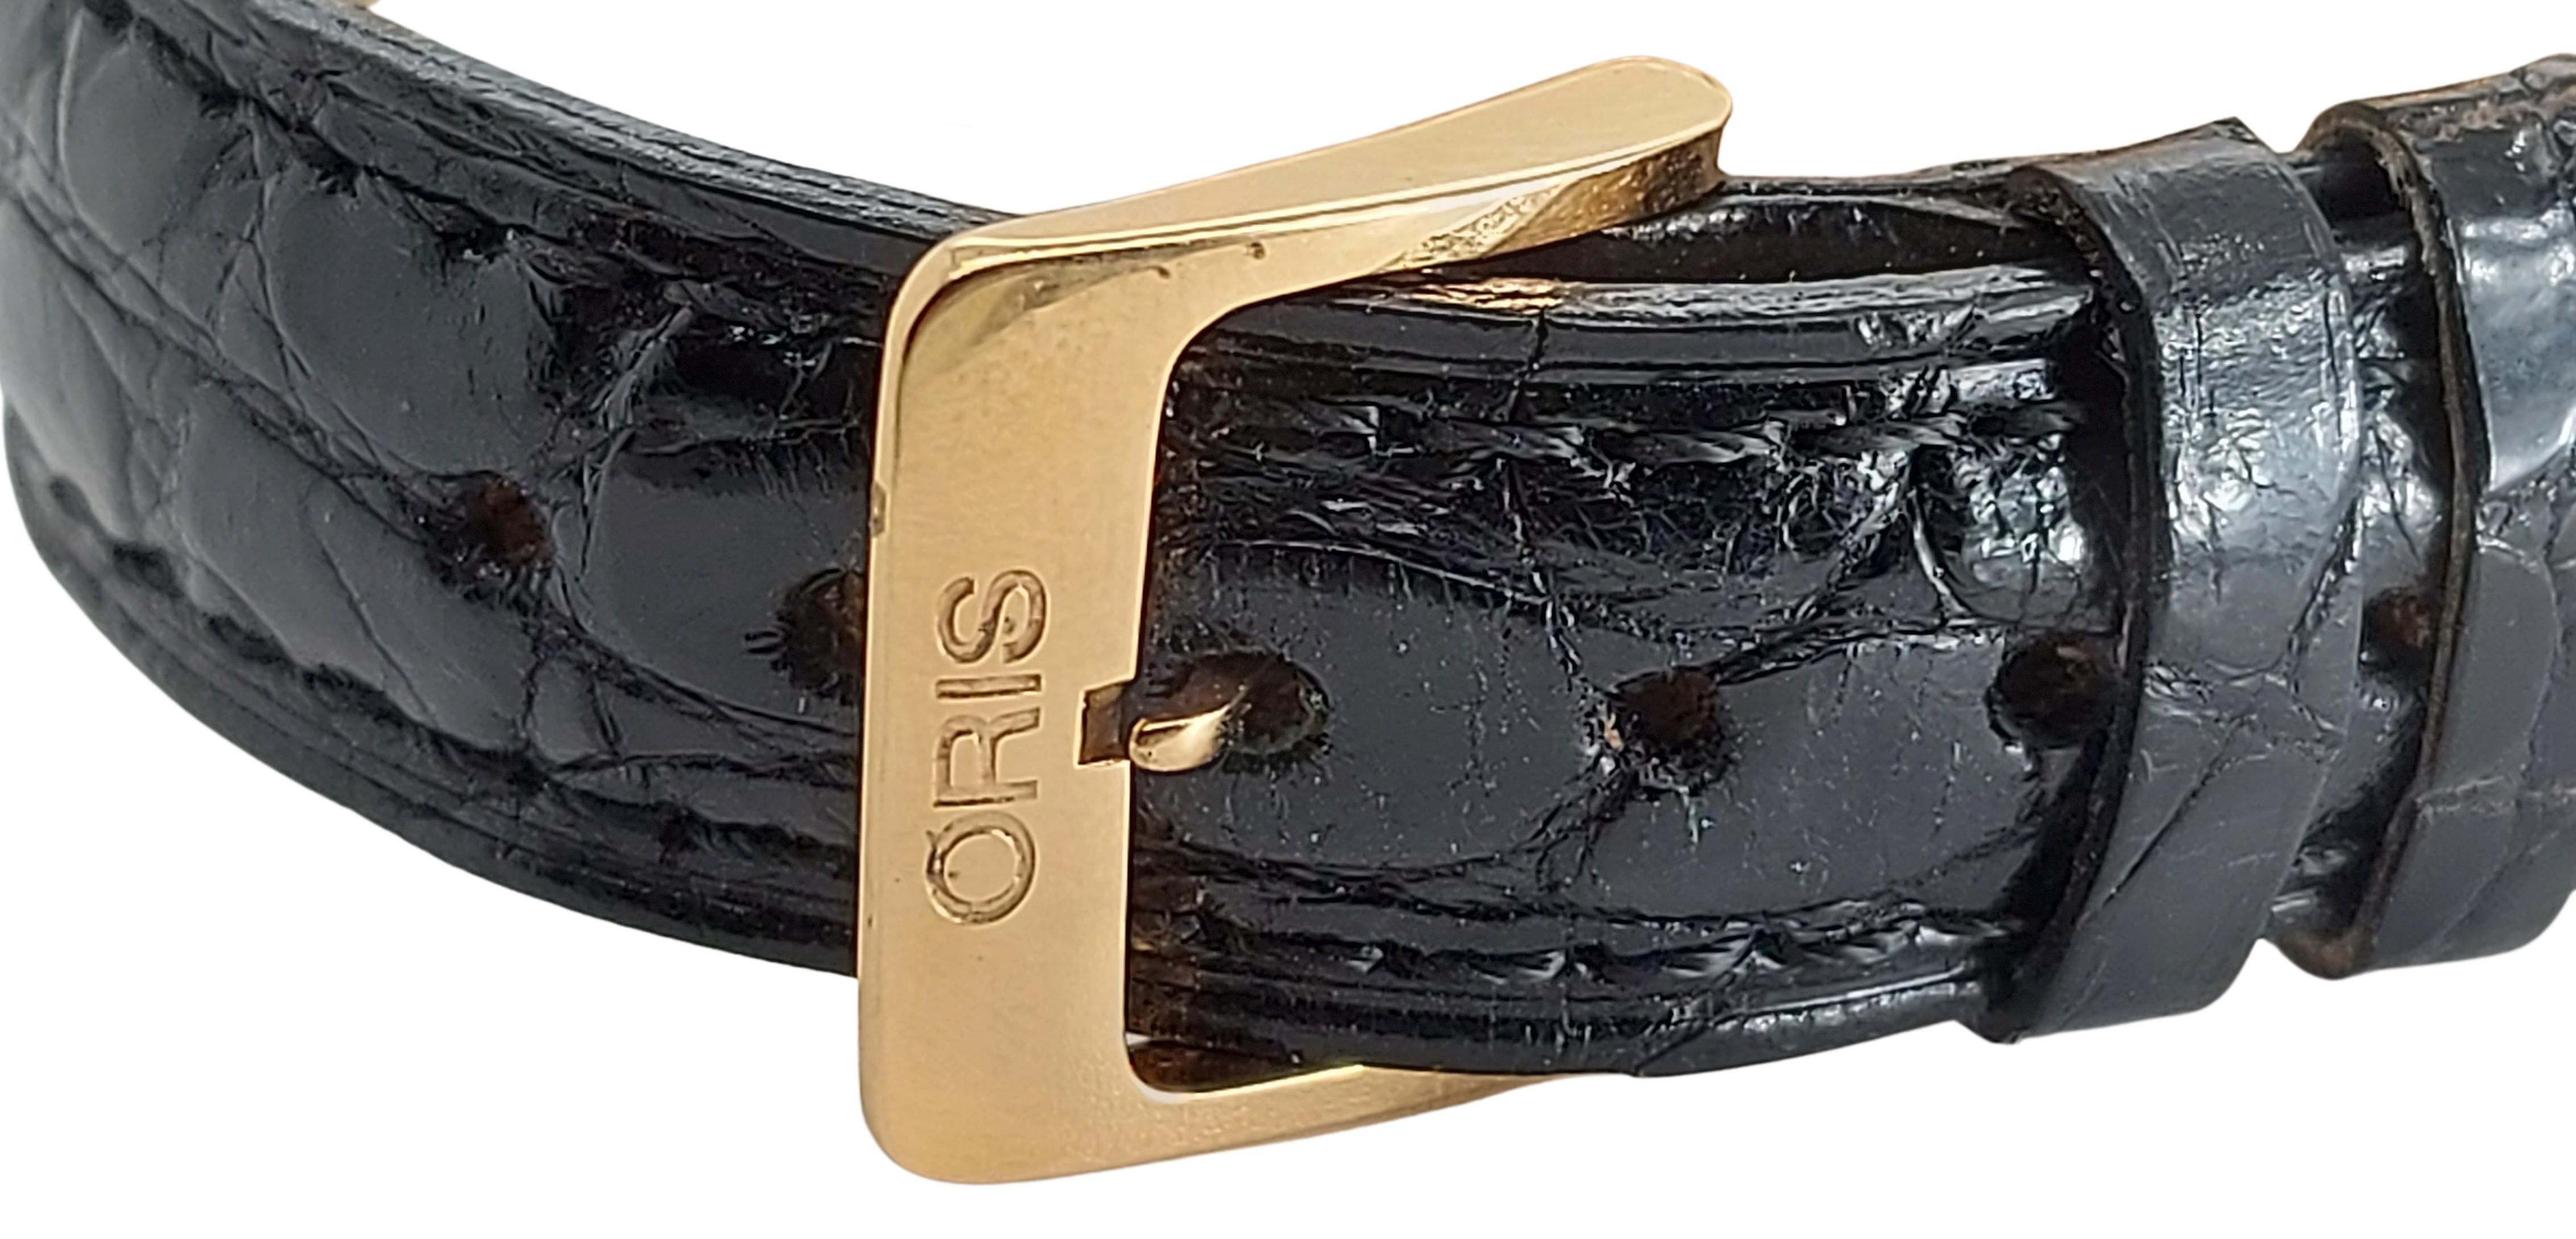 Oris Reveil Limited Edition Mechanical Alarm 18kt Gold, New with Box & Papers For Sale 2